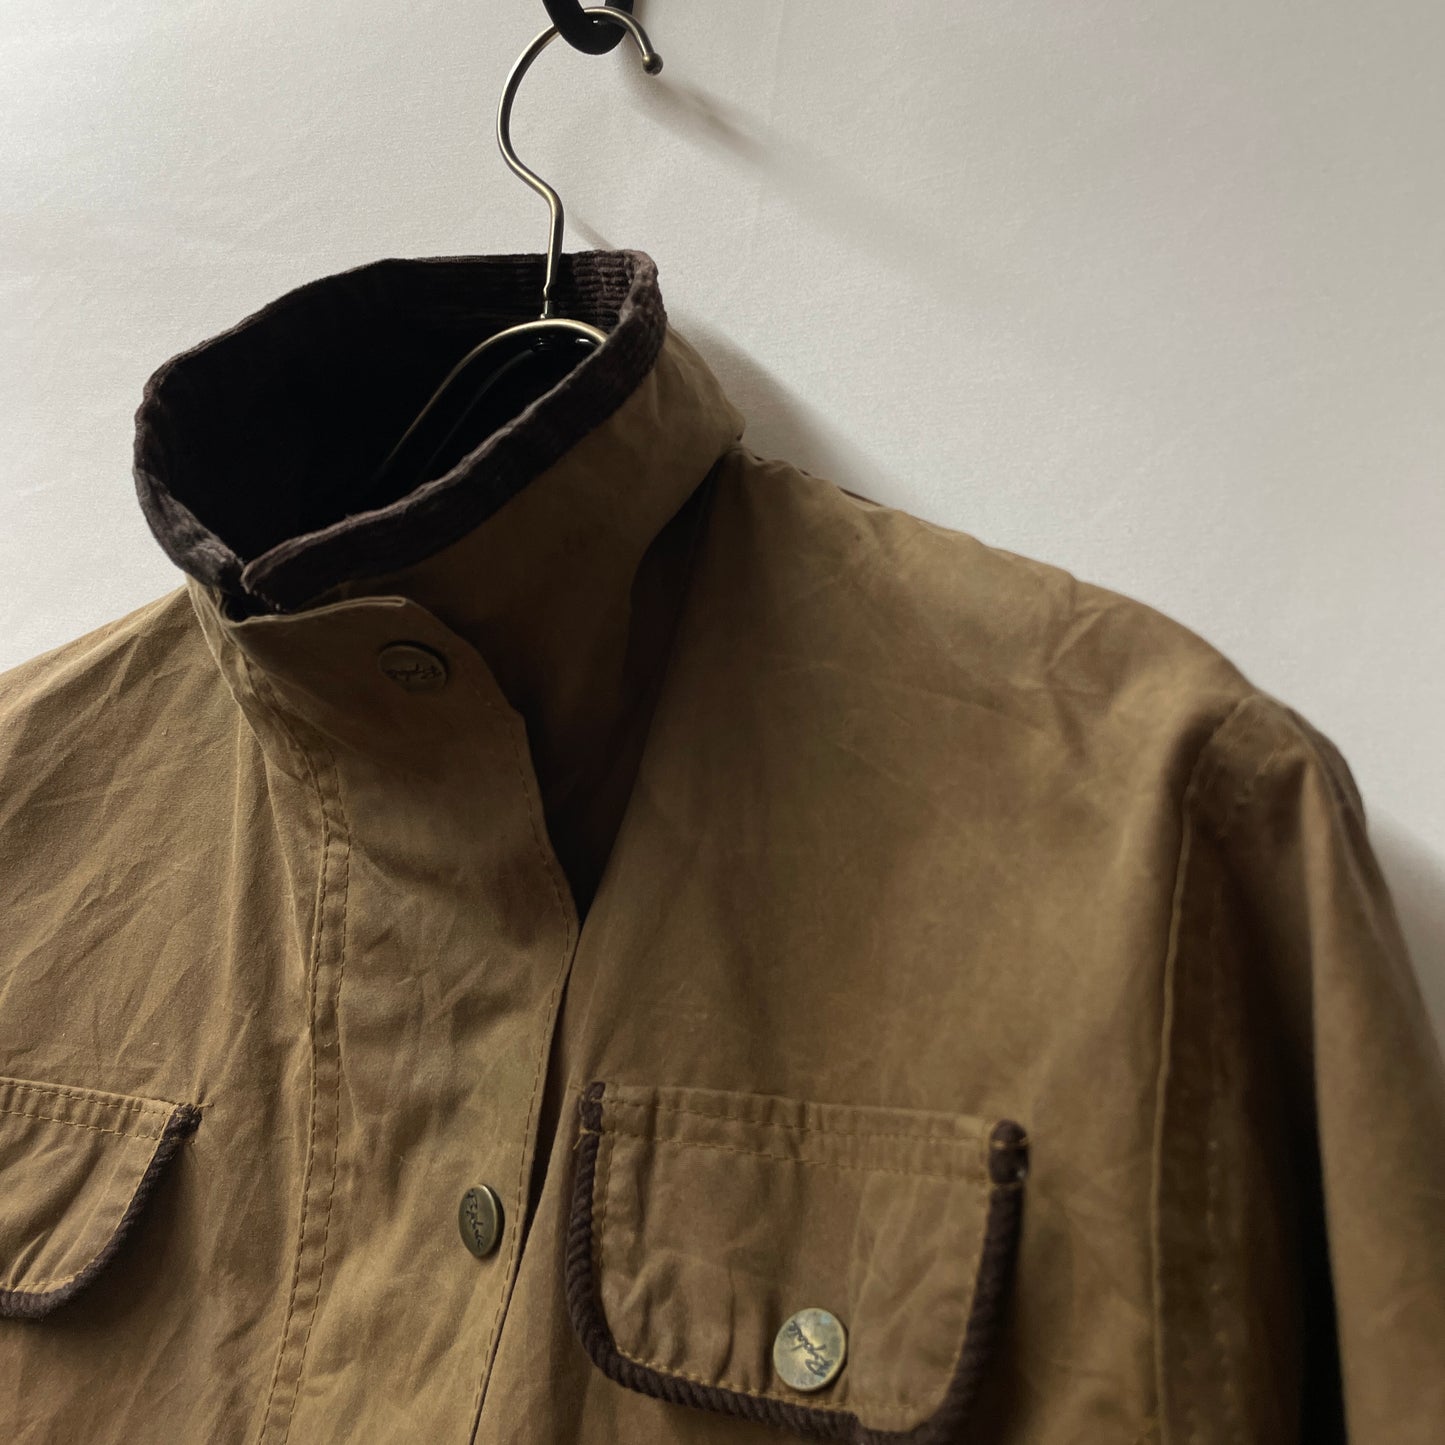 oiled jacket made in england